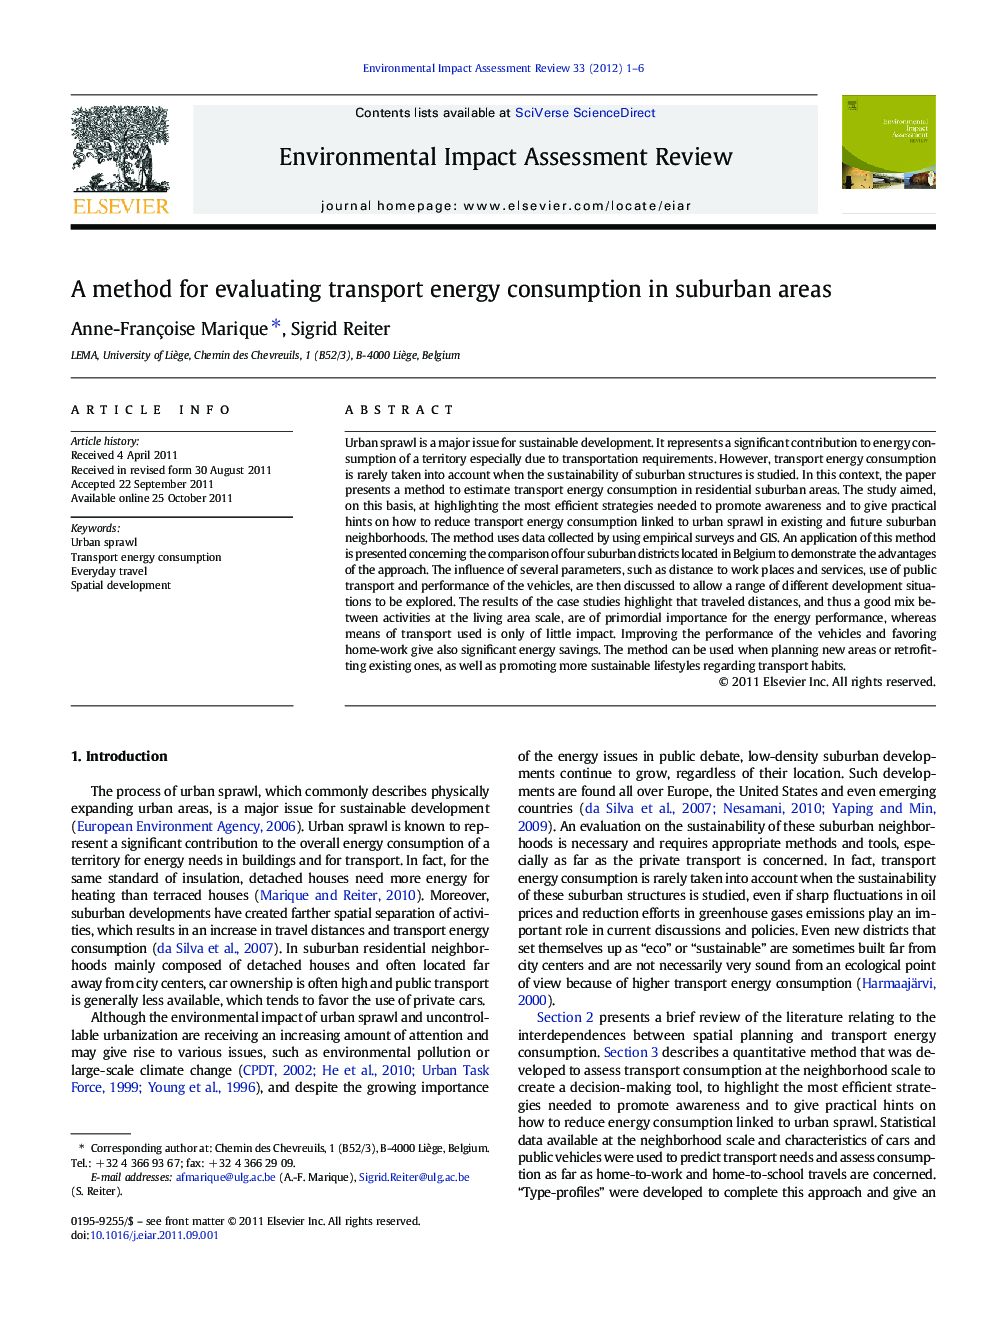 A method for evaluating transport energy consumption in suburban areas